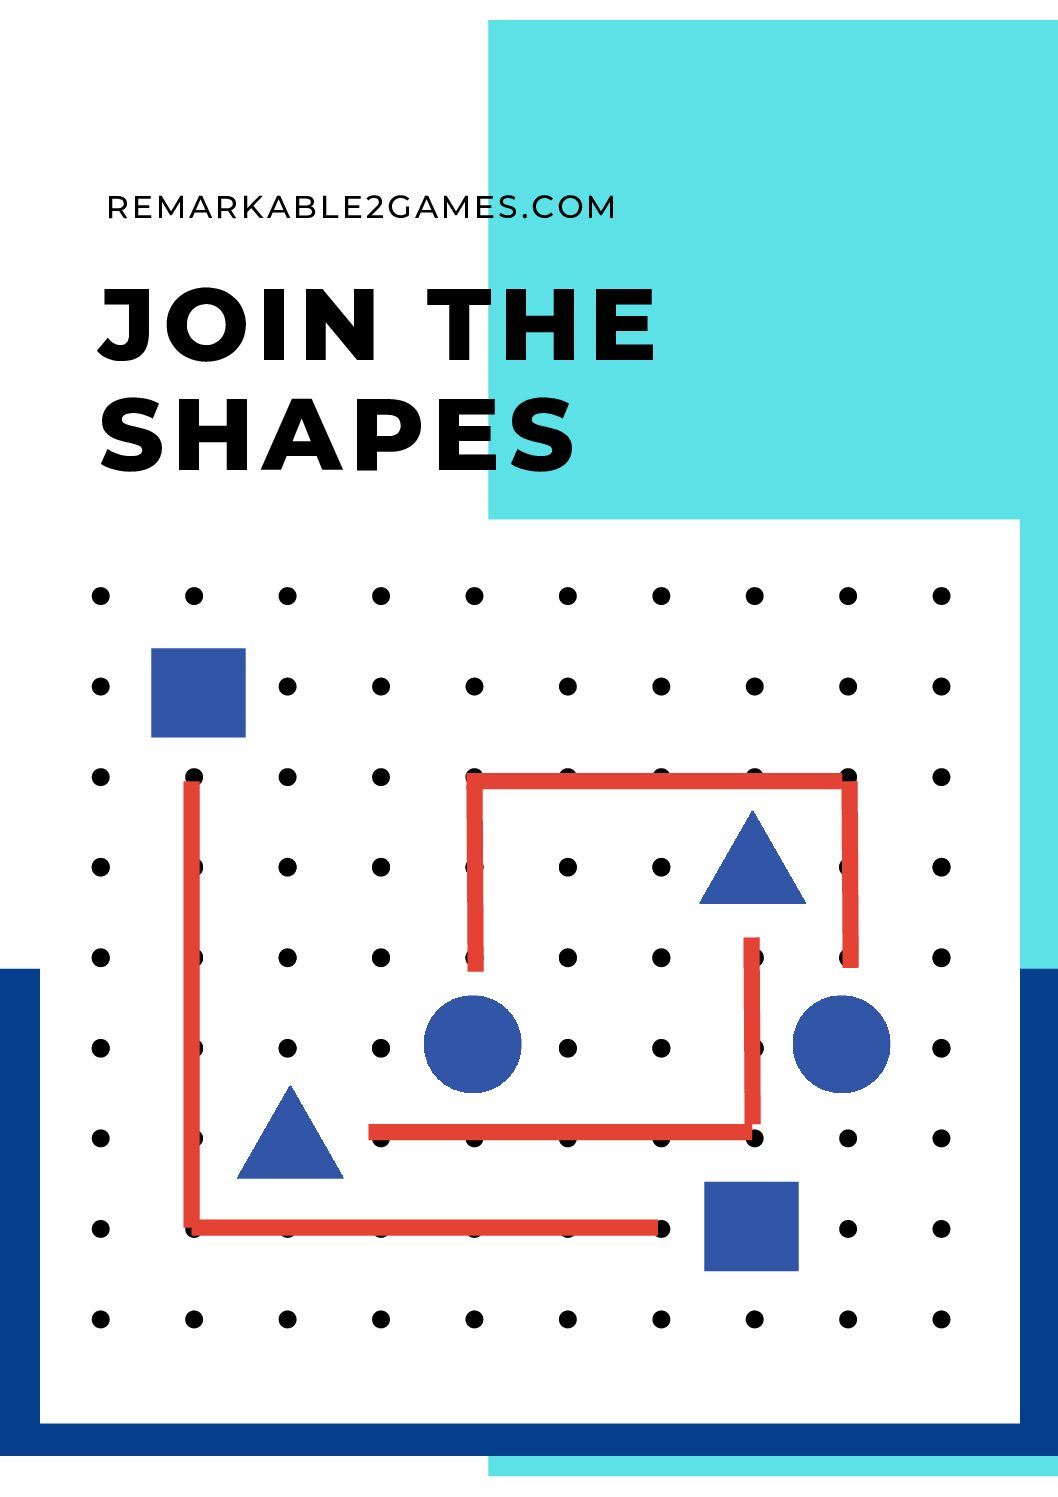 problem solving draw to join shapes